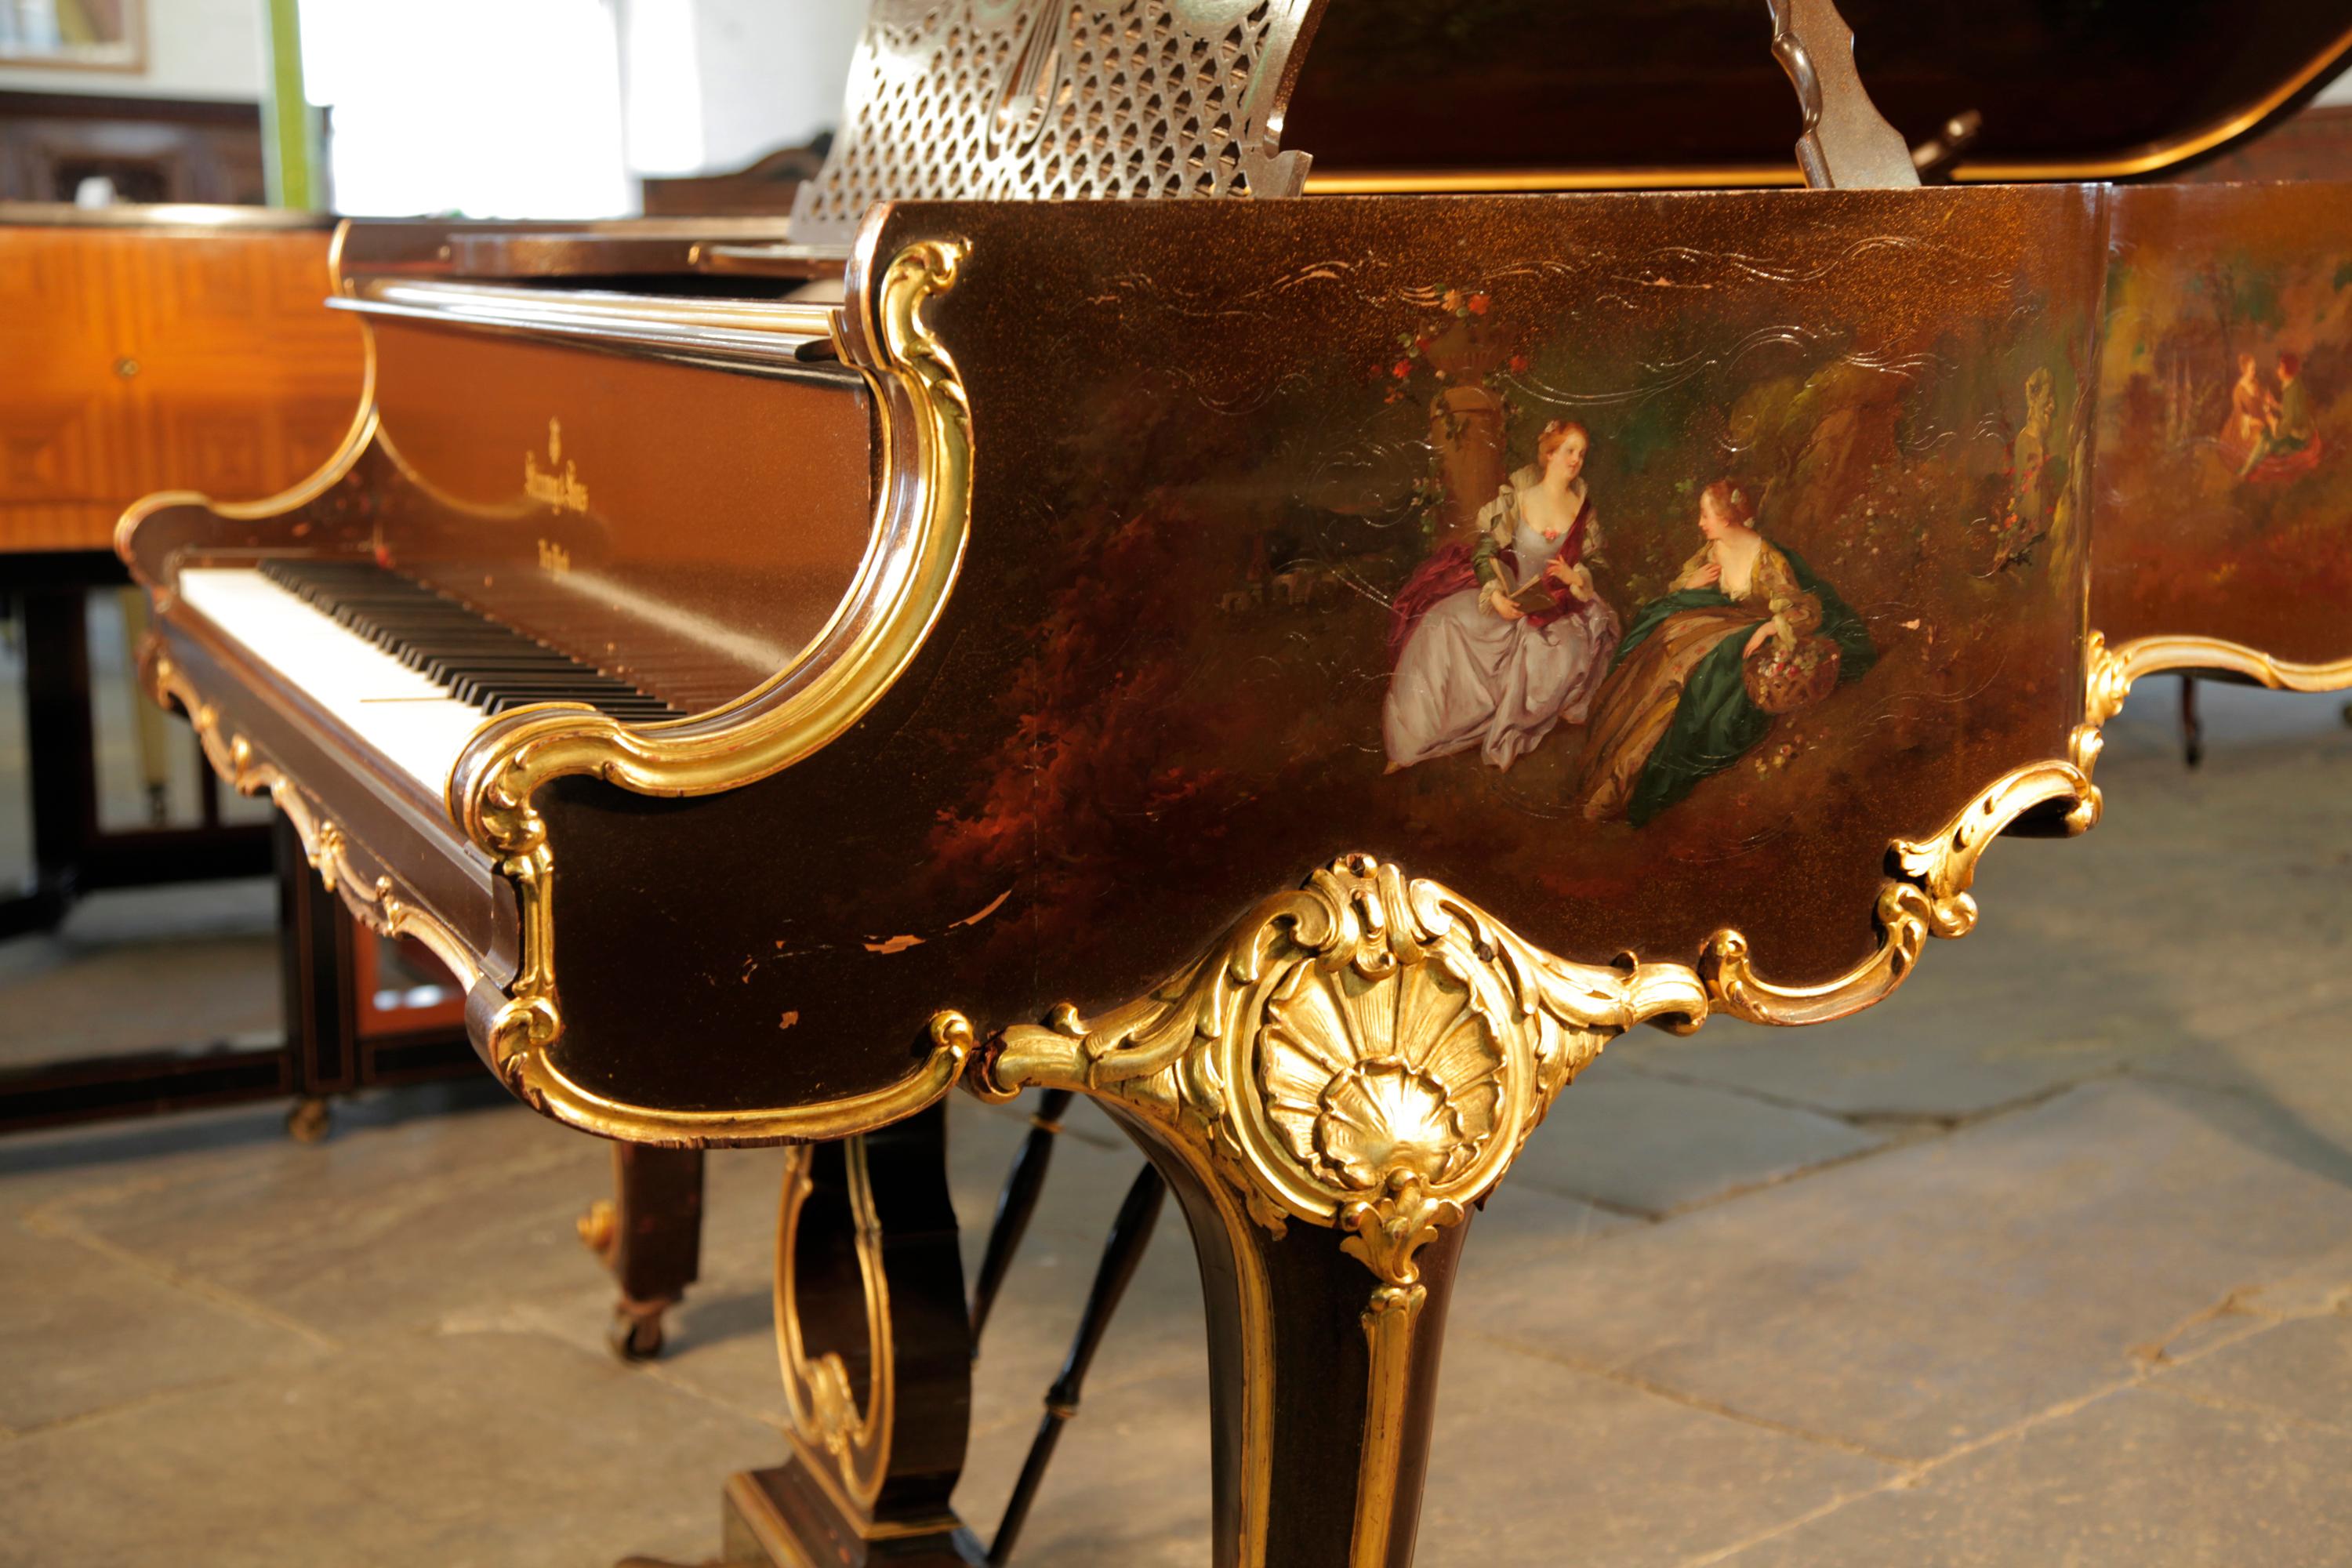 Rococo Style, 1904, Steinway Model B grand piano.
Music desk is in a cut-out latticework design with a central lyre motif decorated with draping swags.
The three-pedal piano lyre with brass footplate is in a scrolling S-curve acanthus design with